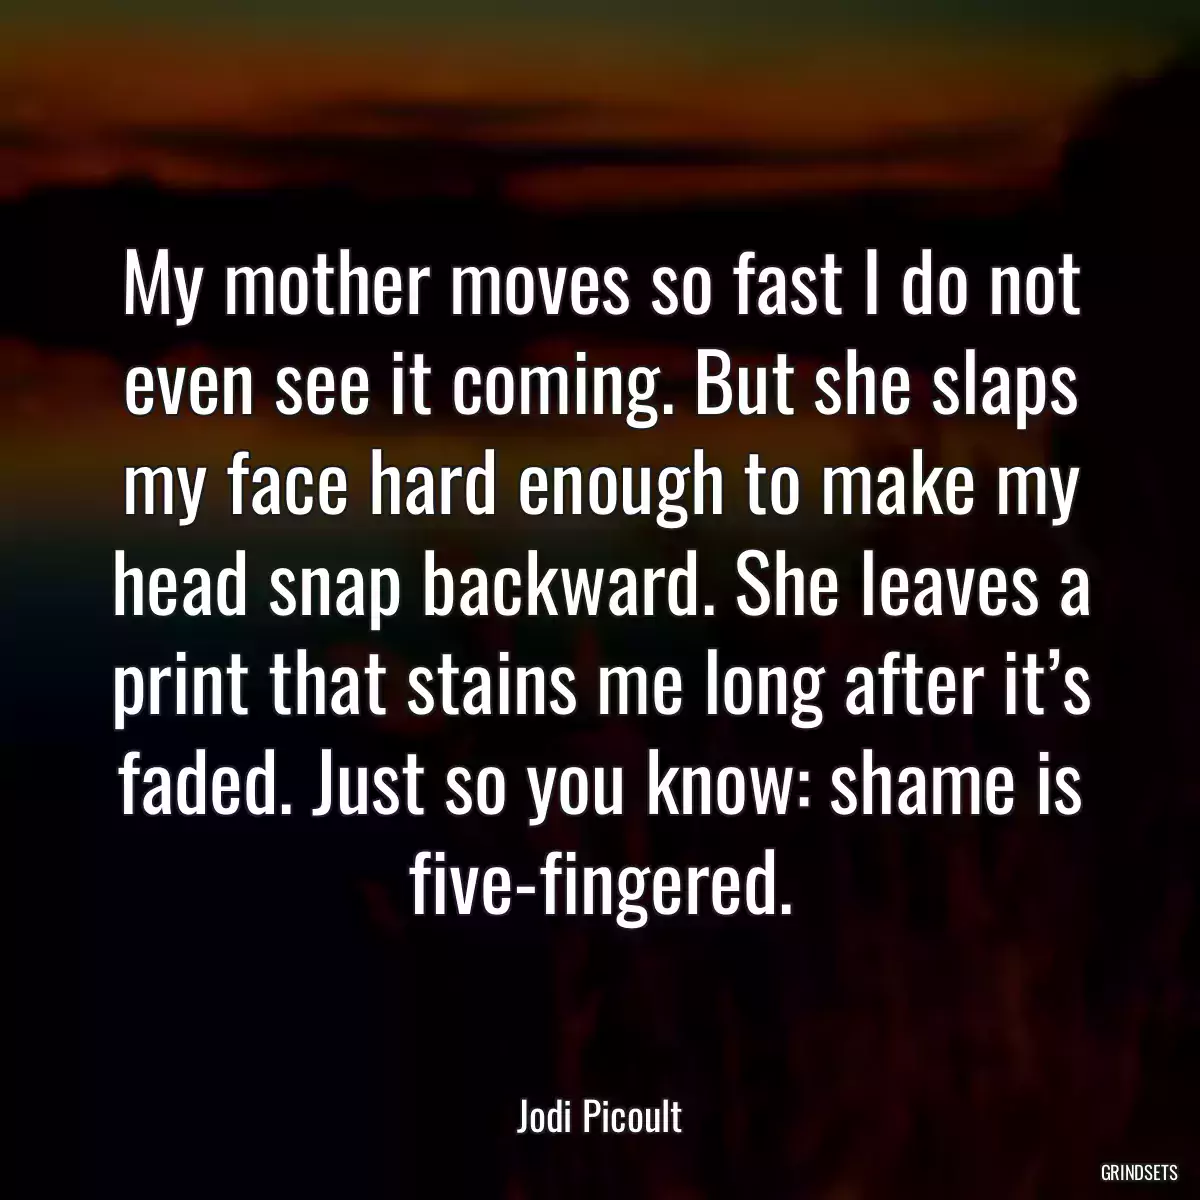 My mother moves so fast I do not even see it coming. But she slaps my face hard enough to make my head snap backward. She leaves a print that stains me long after it’s faded. Just so you know: shame is five-fingered.